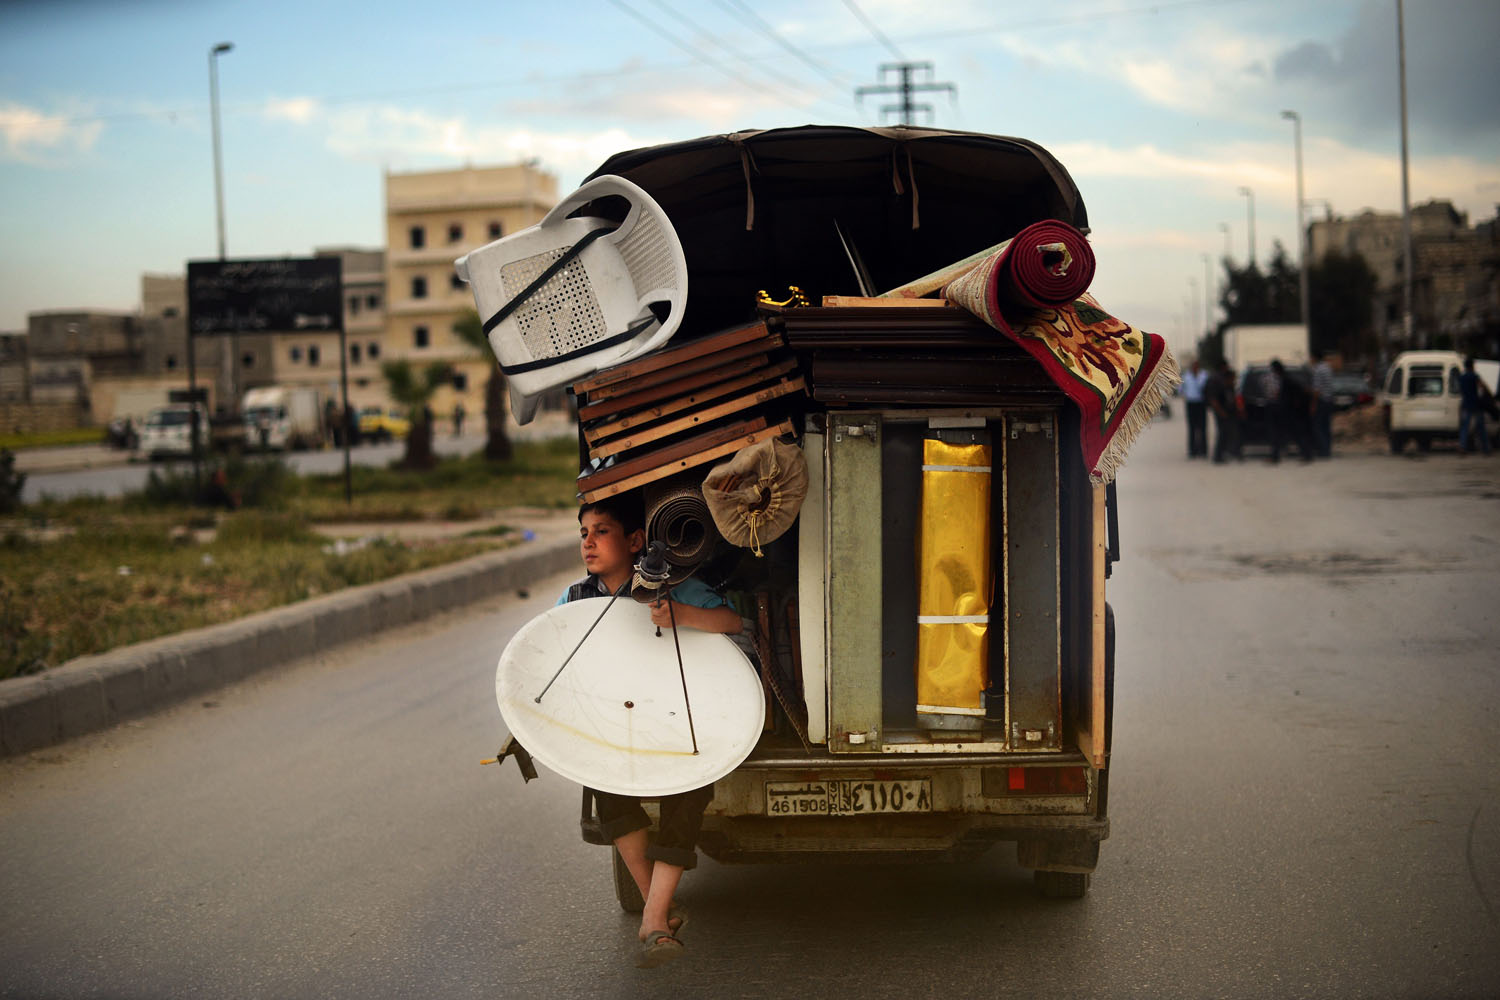 April 15, 2013. A Syrian boy holds a satellite antenna as he travels on the back of a truck in the northern Syrian city of Aleppo. In all, some 1.3 million people have so far fled Syria to neighbouring countries since the beginning of the conflict, which has cost well over 70,000 lives.